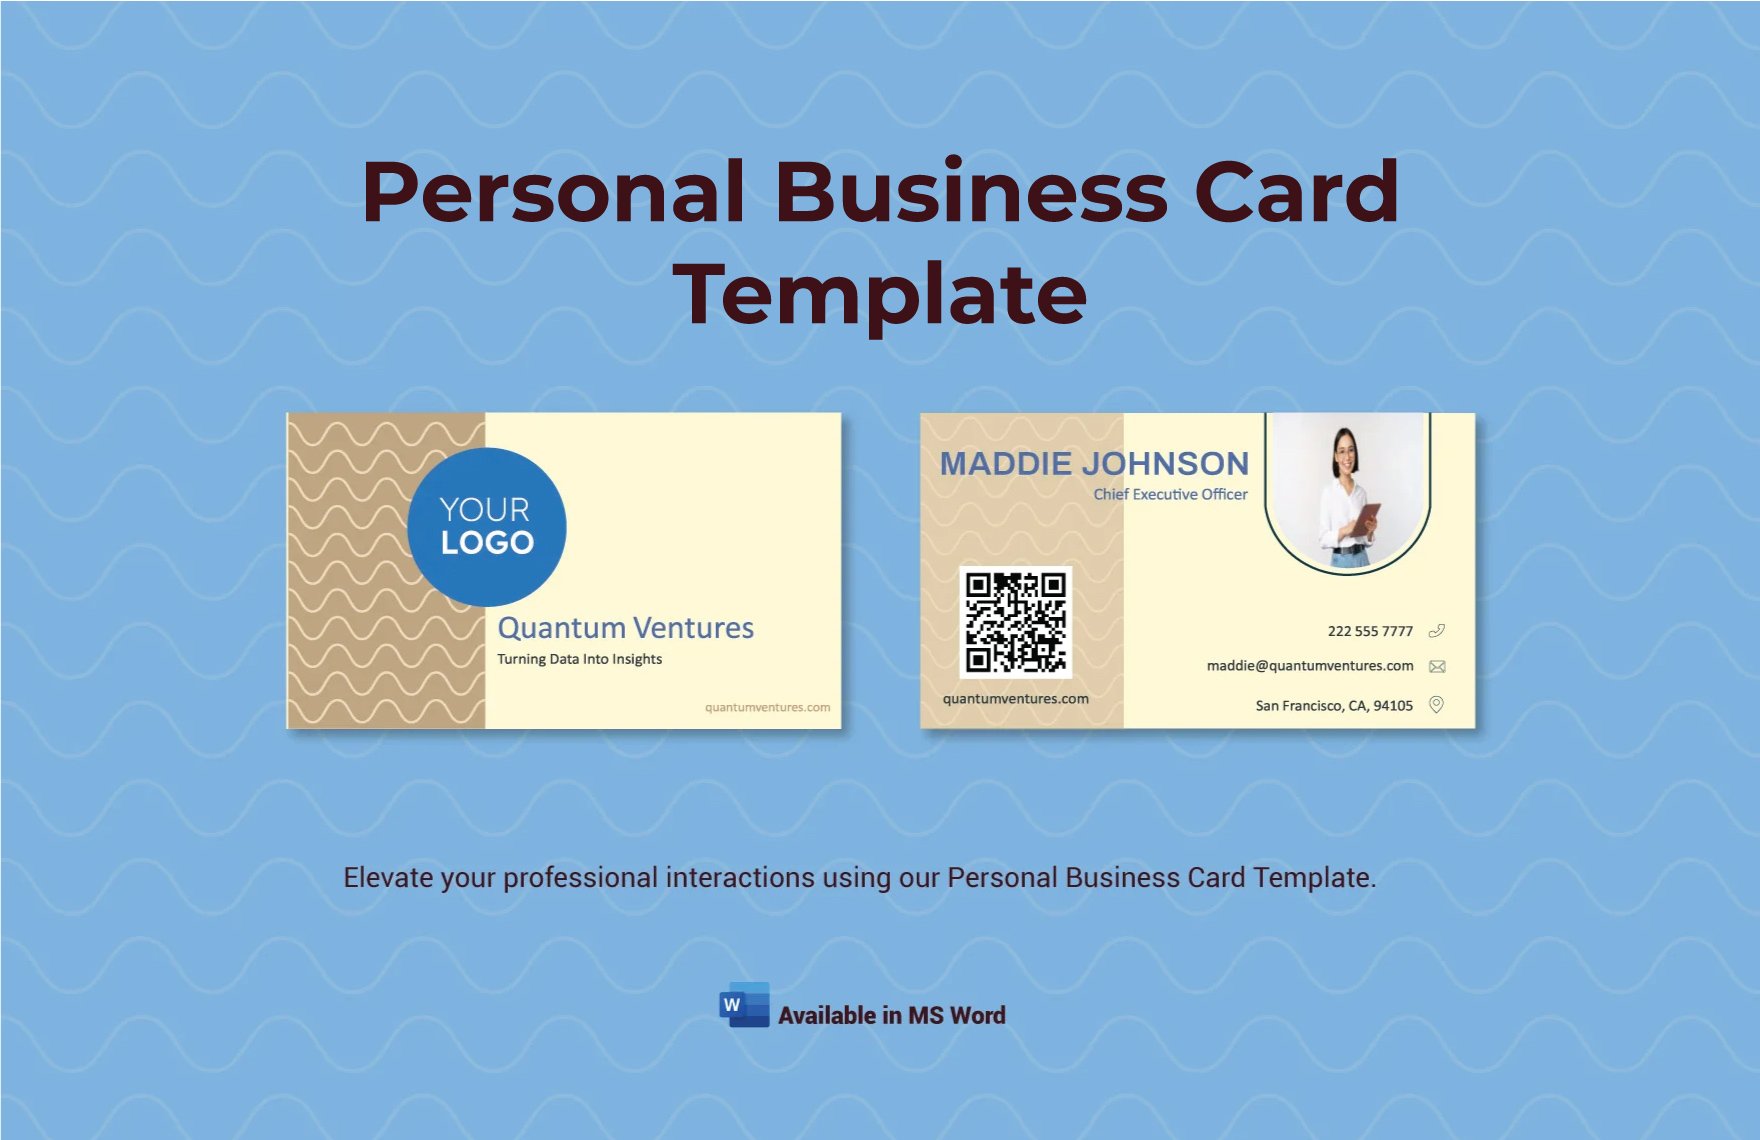 Free Personal Business Card Template in Word, PDF, Illustrator, Publisher, Adobe XD